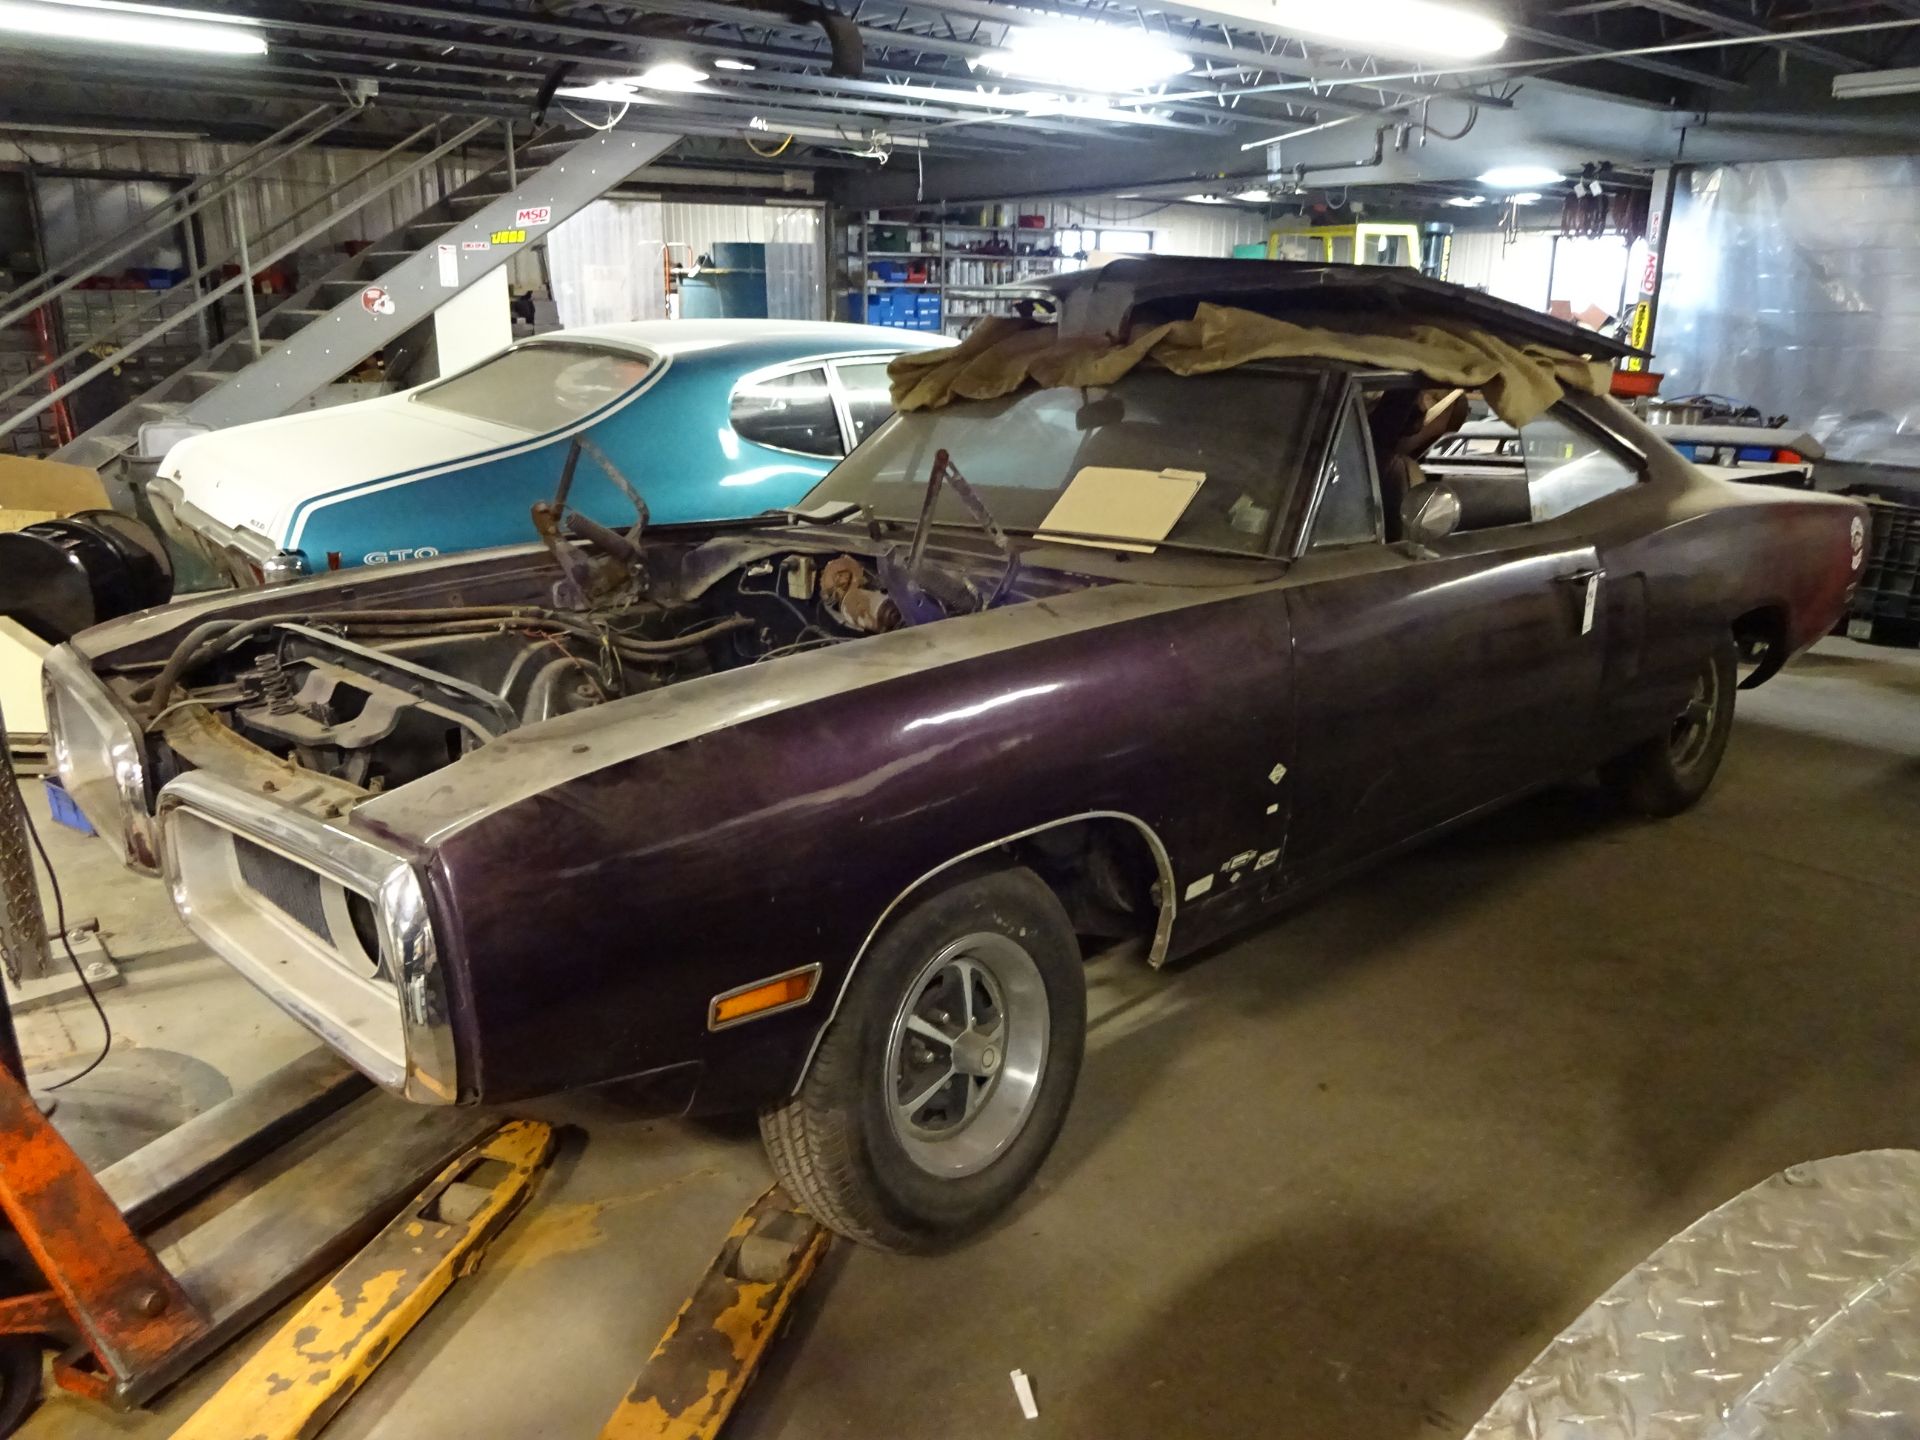 1970 PLYMOUTH SUPER BEE - Image 4 of 6